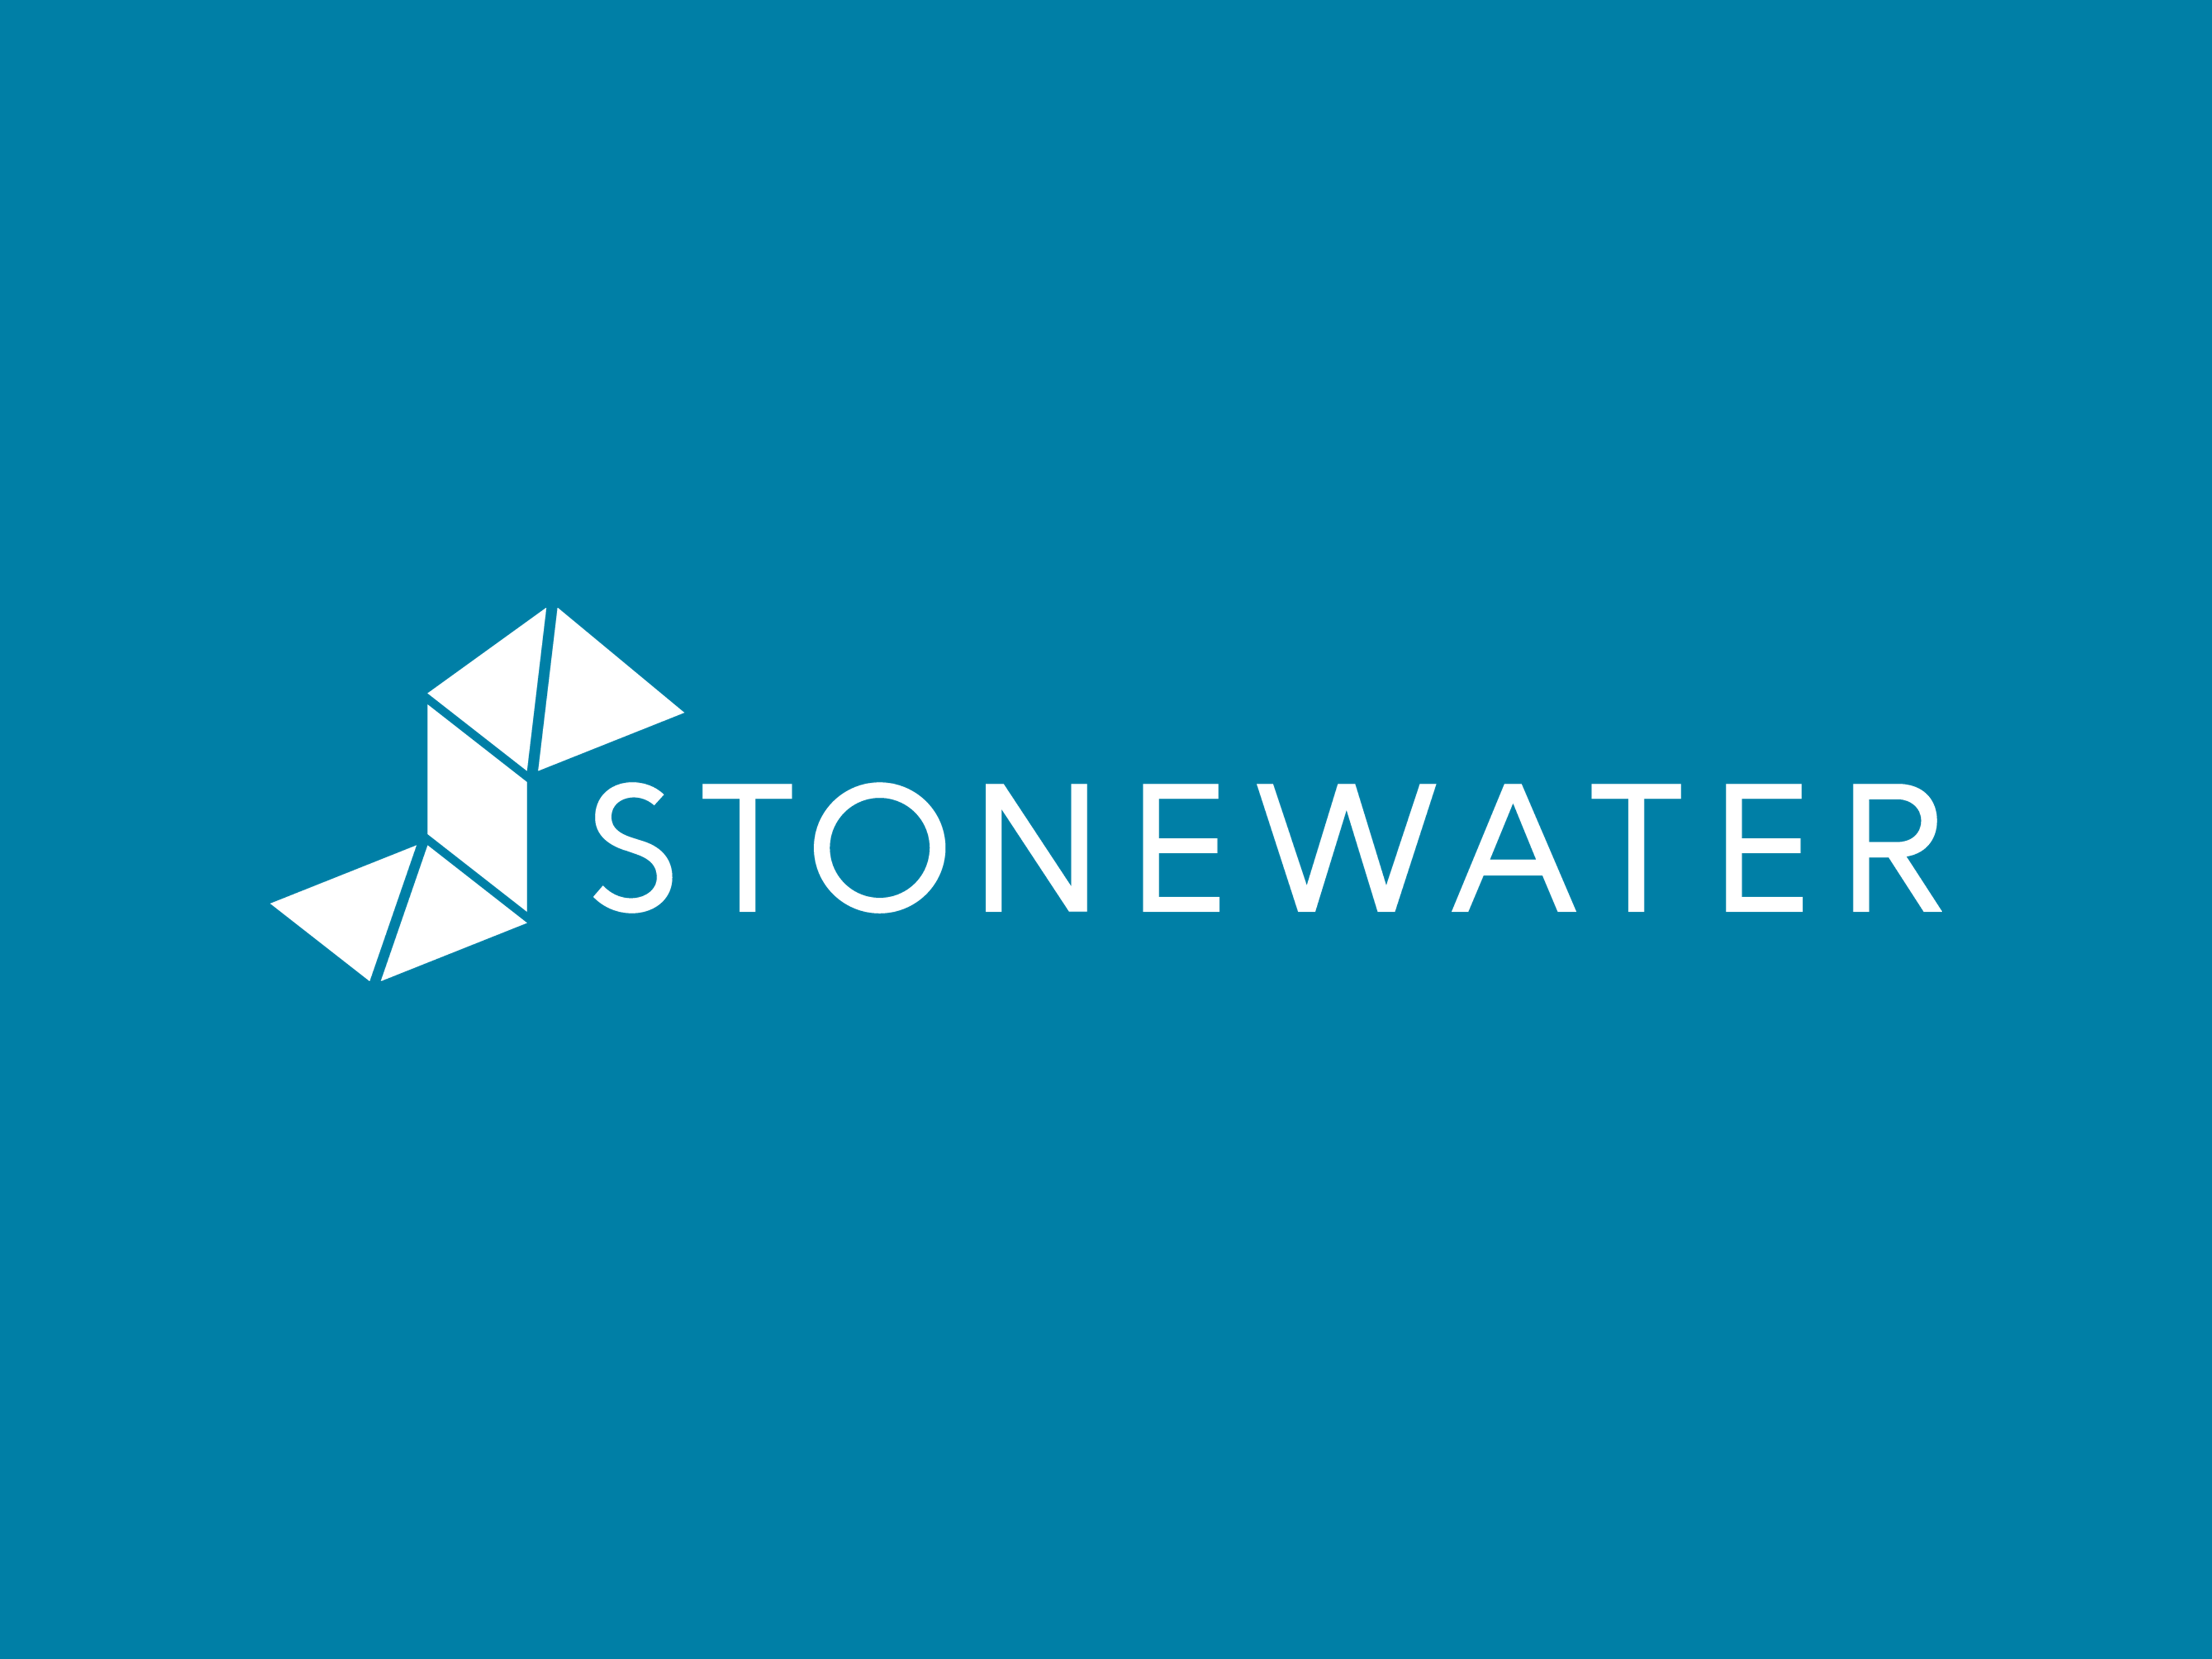 Blue background with Stonewater logo